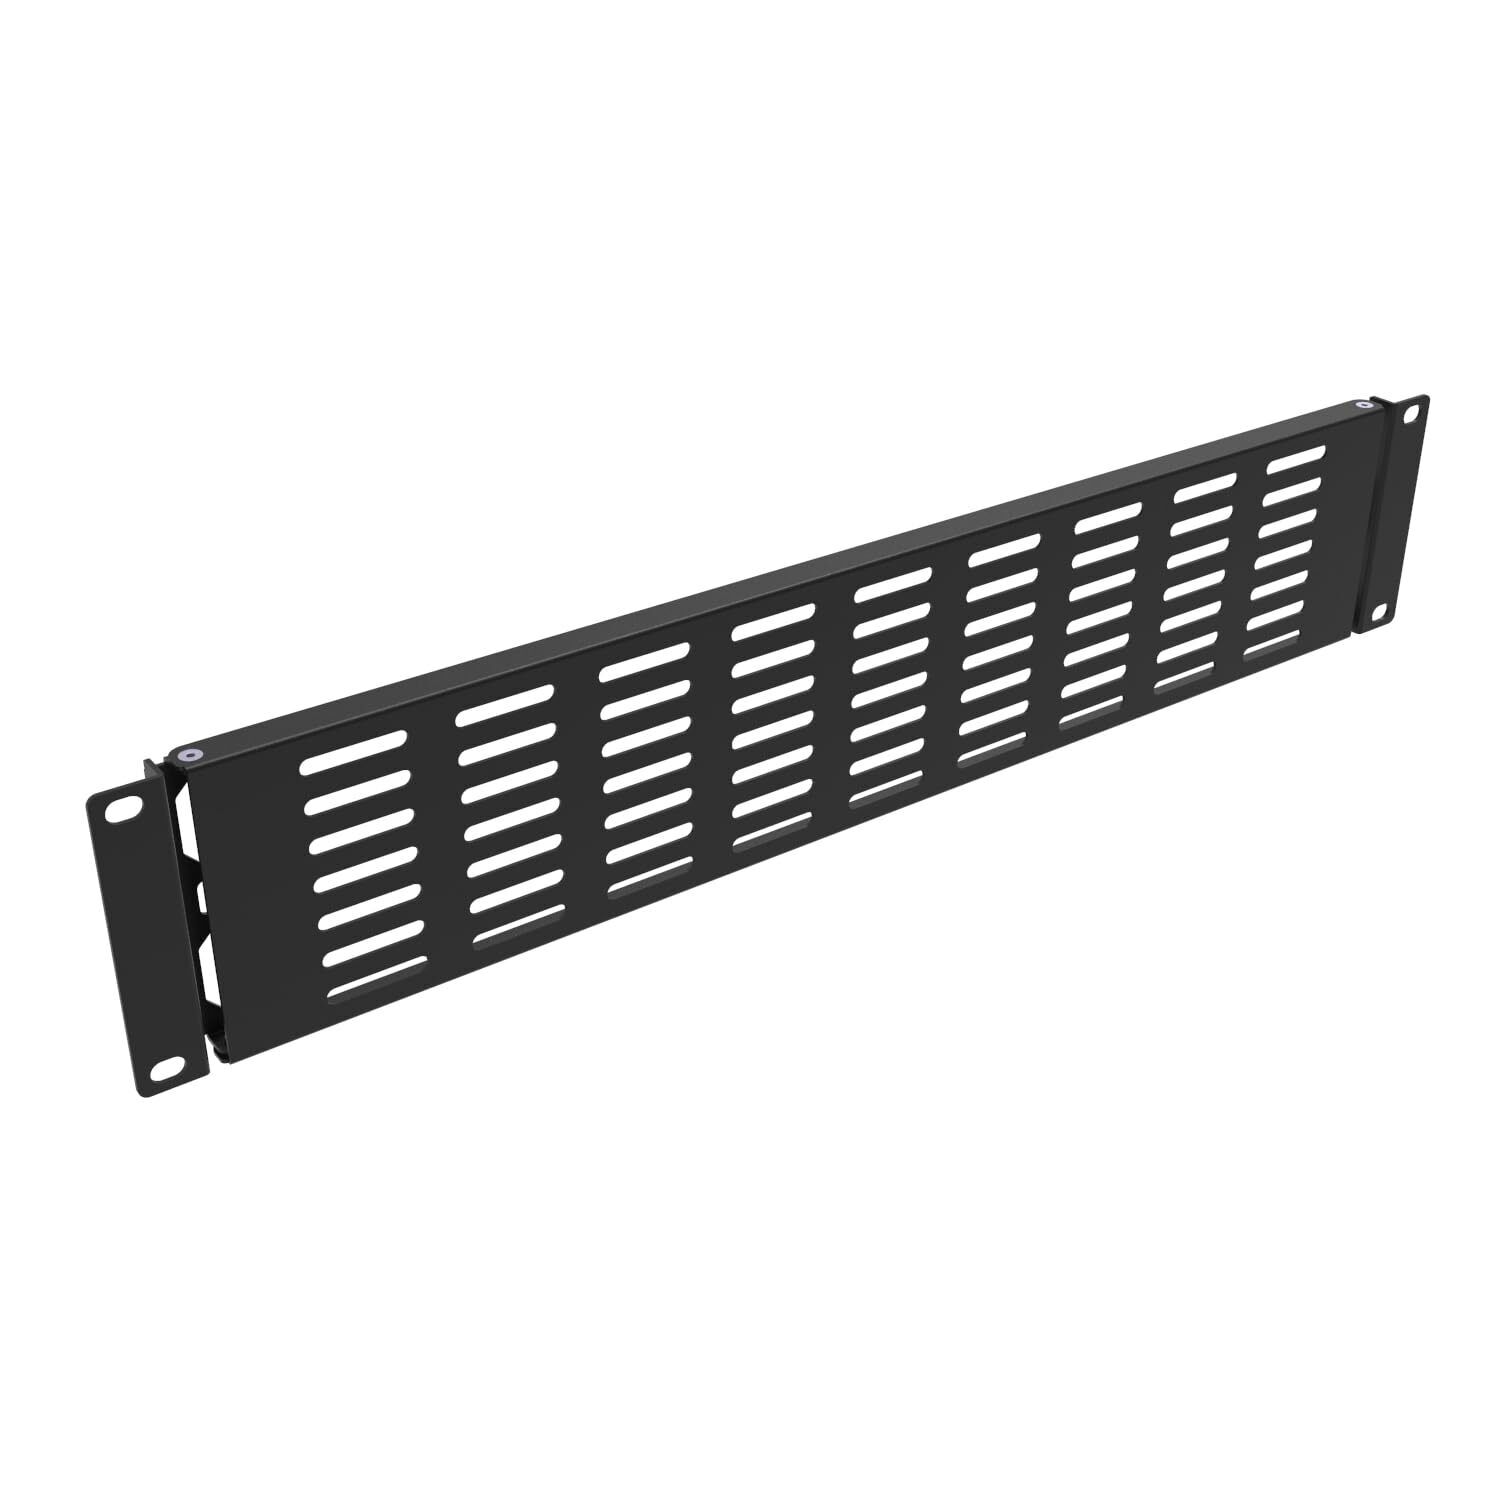 2U Hinged Blank Rack Mount Panel Spacer with Venting for 19 inches Network Ca...